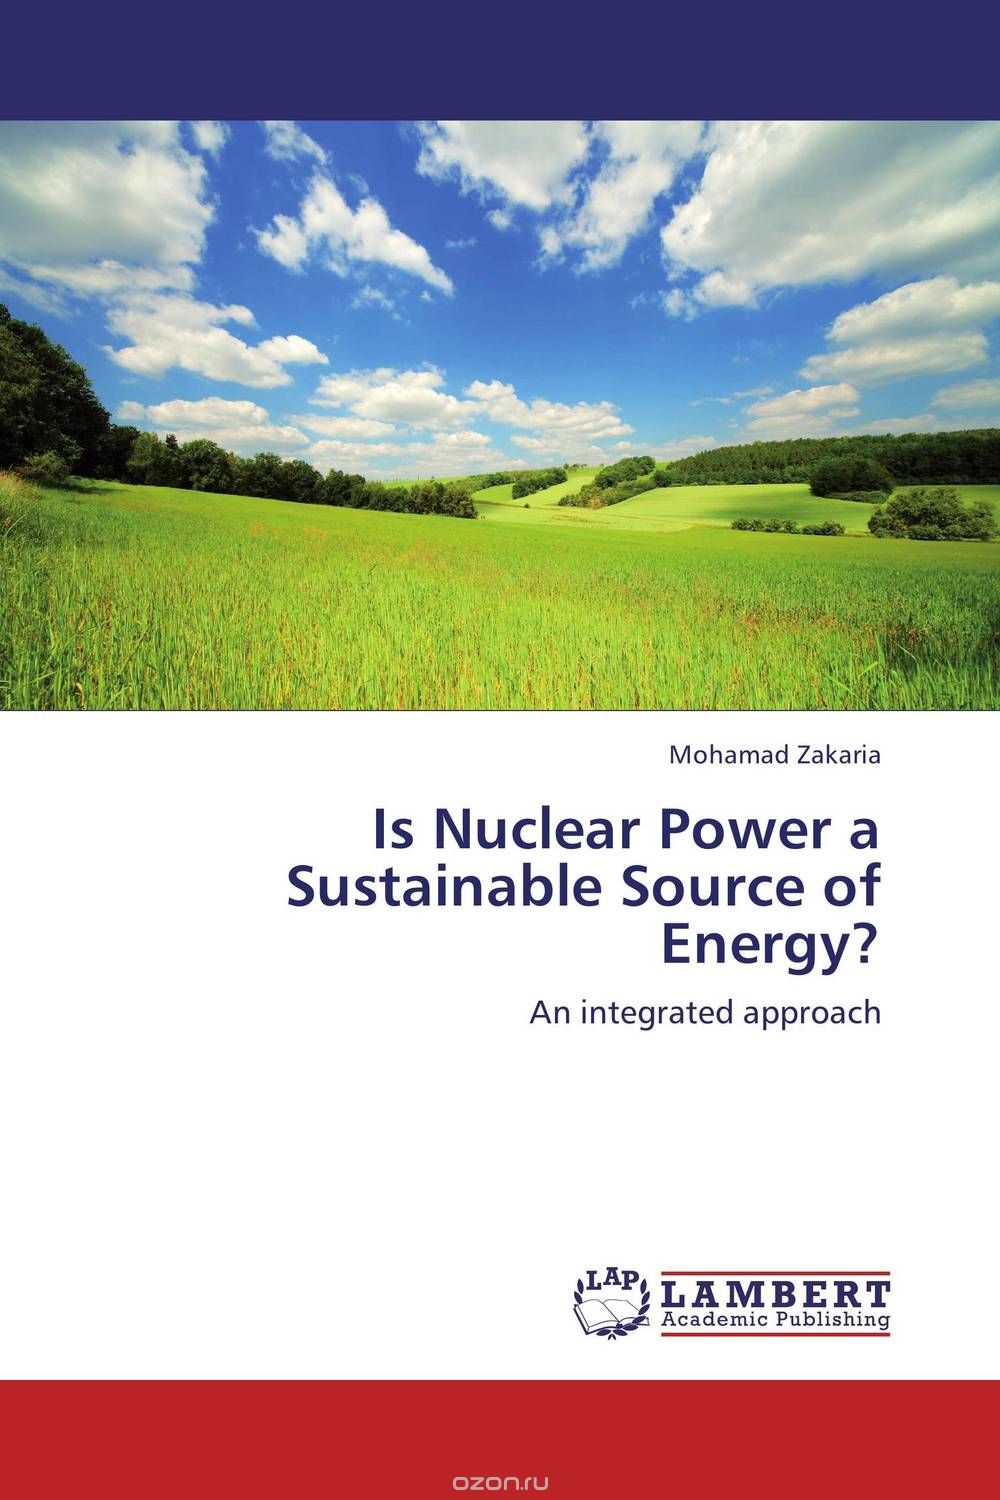 Скачать книгу "Is Nuclear Power a Sustainable Source of Energy?"